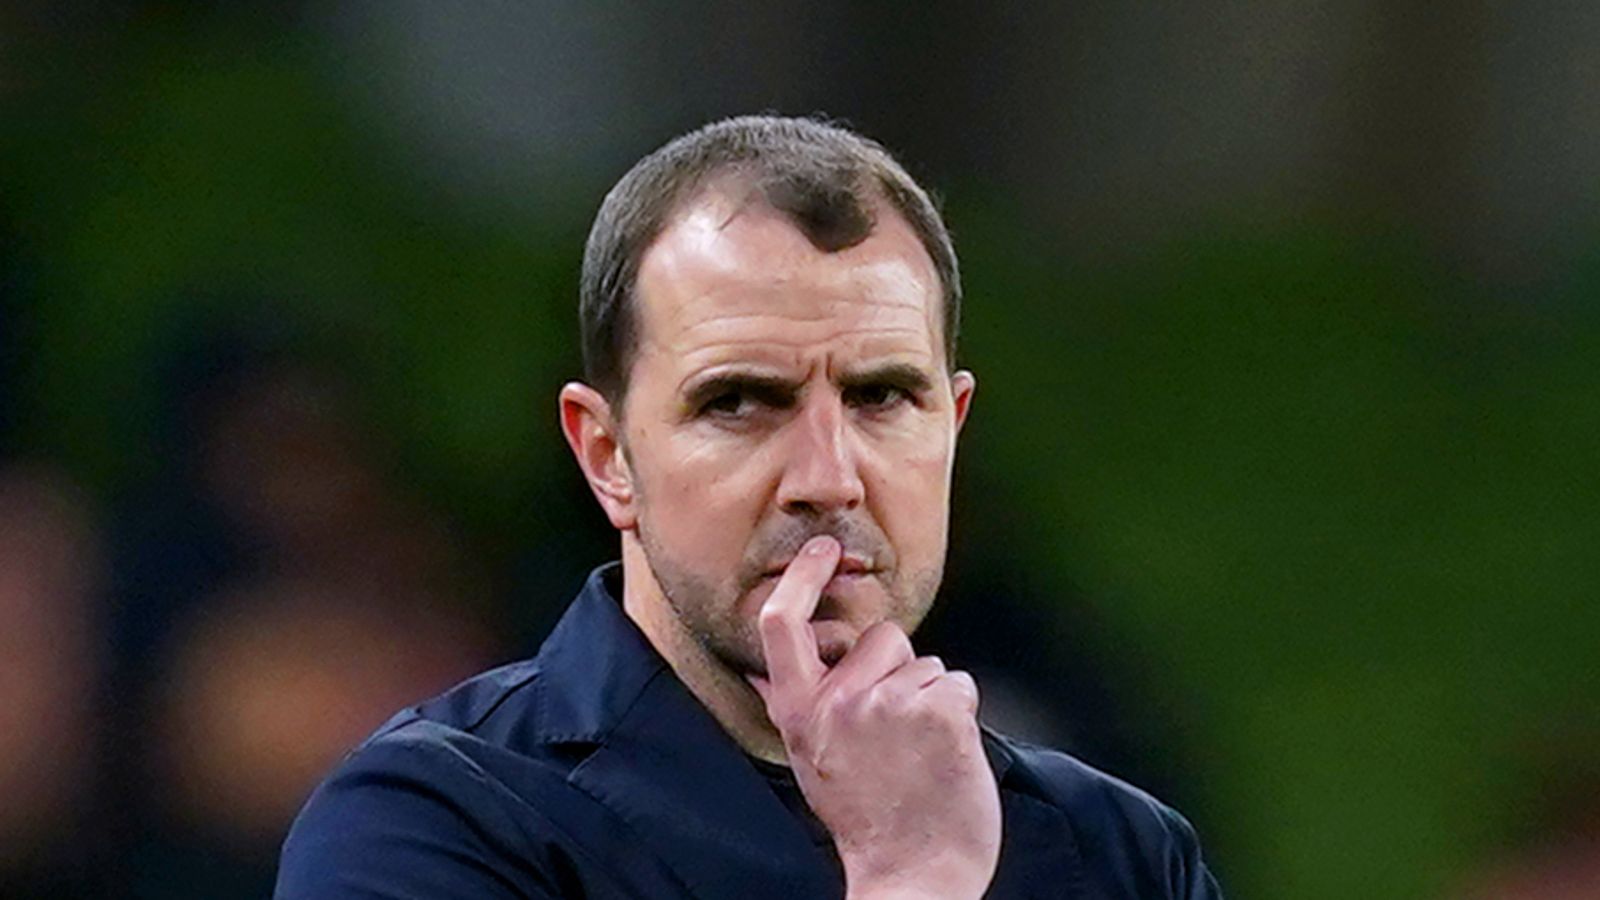 Republic of Ireland 0-1 Switzerland: John O’Shea’s interim spell as manager ends in defeat